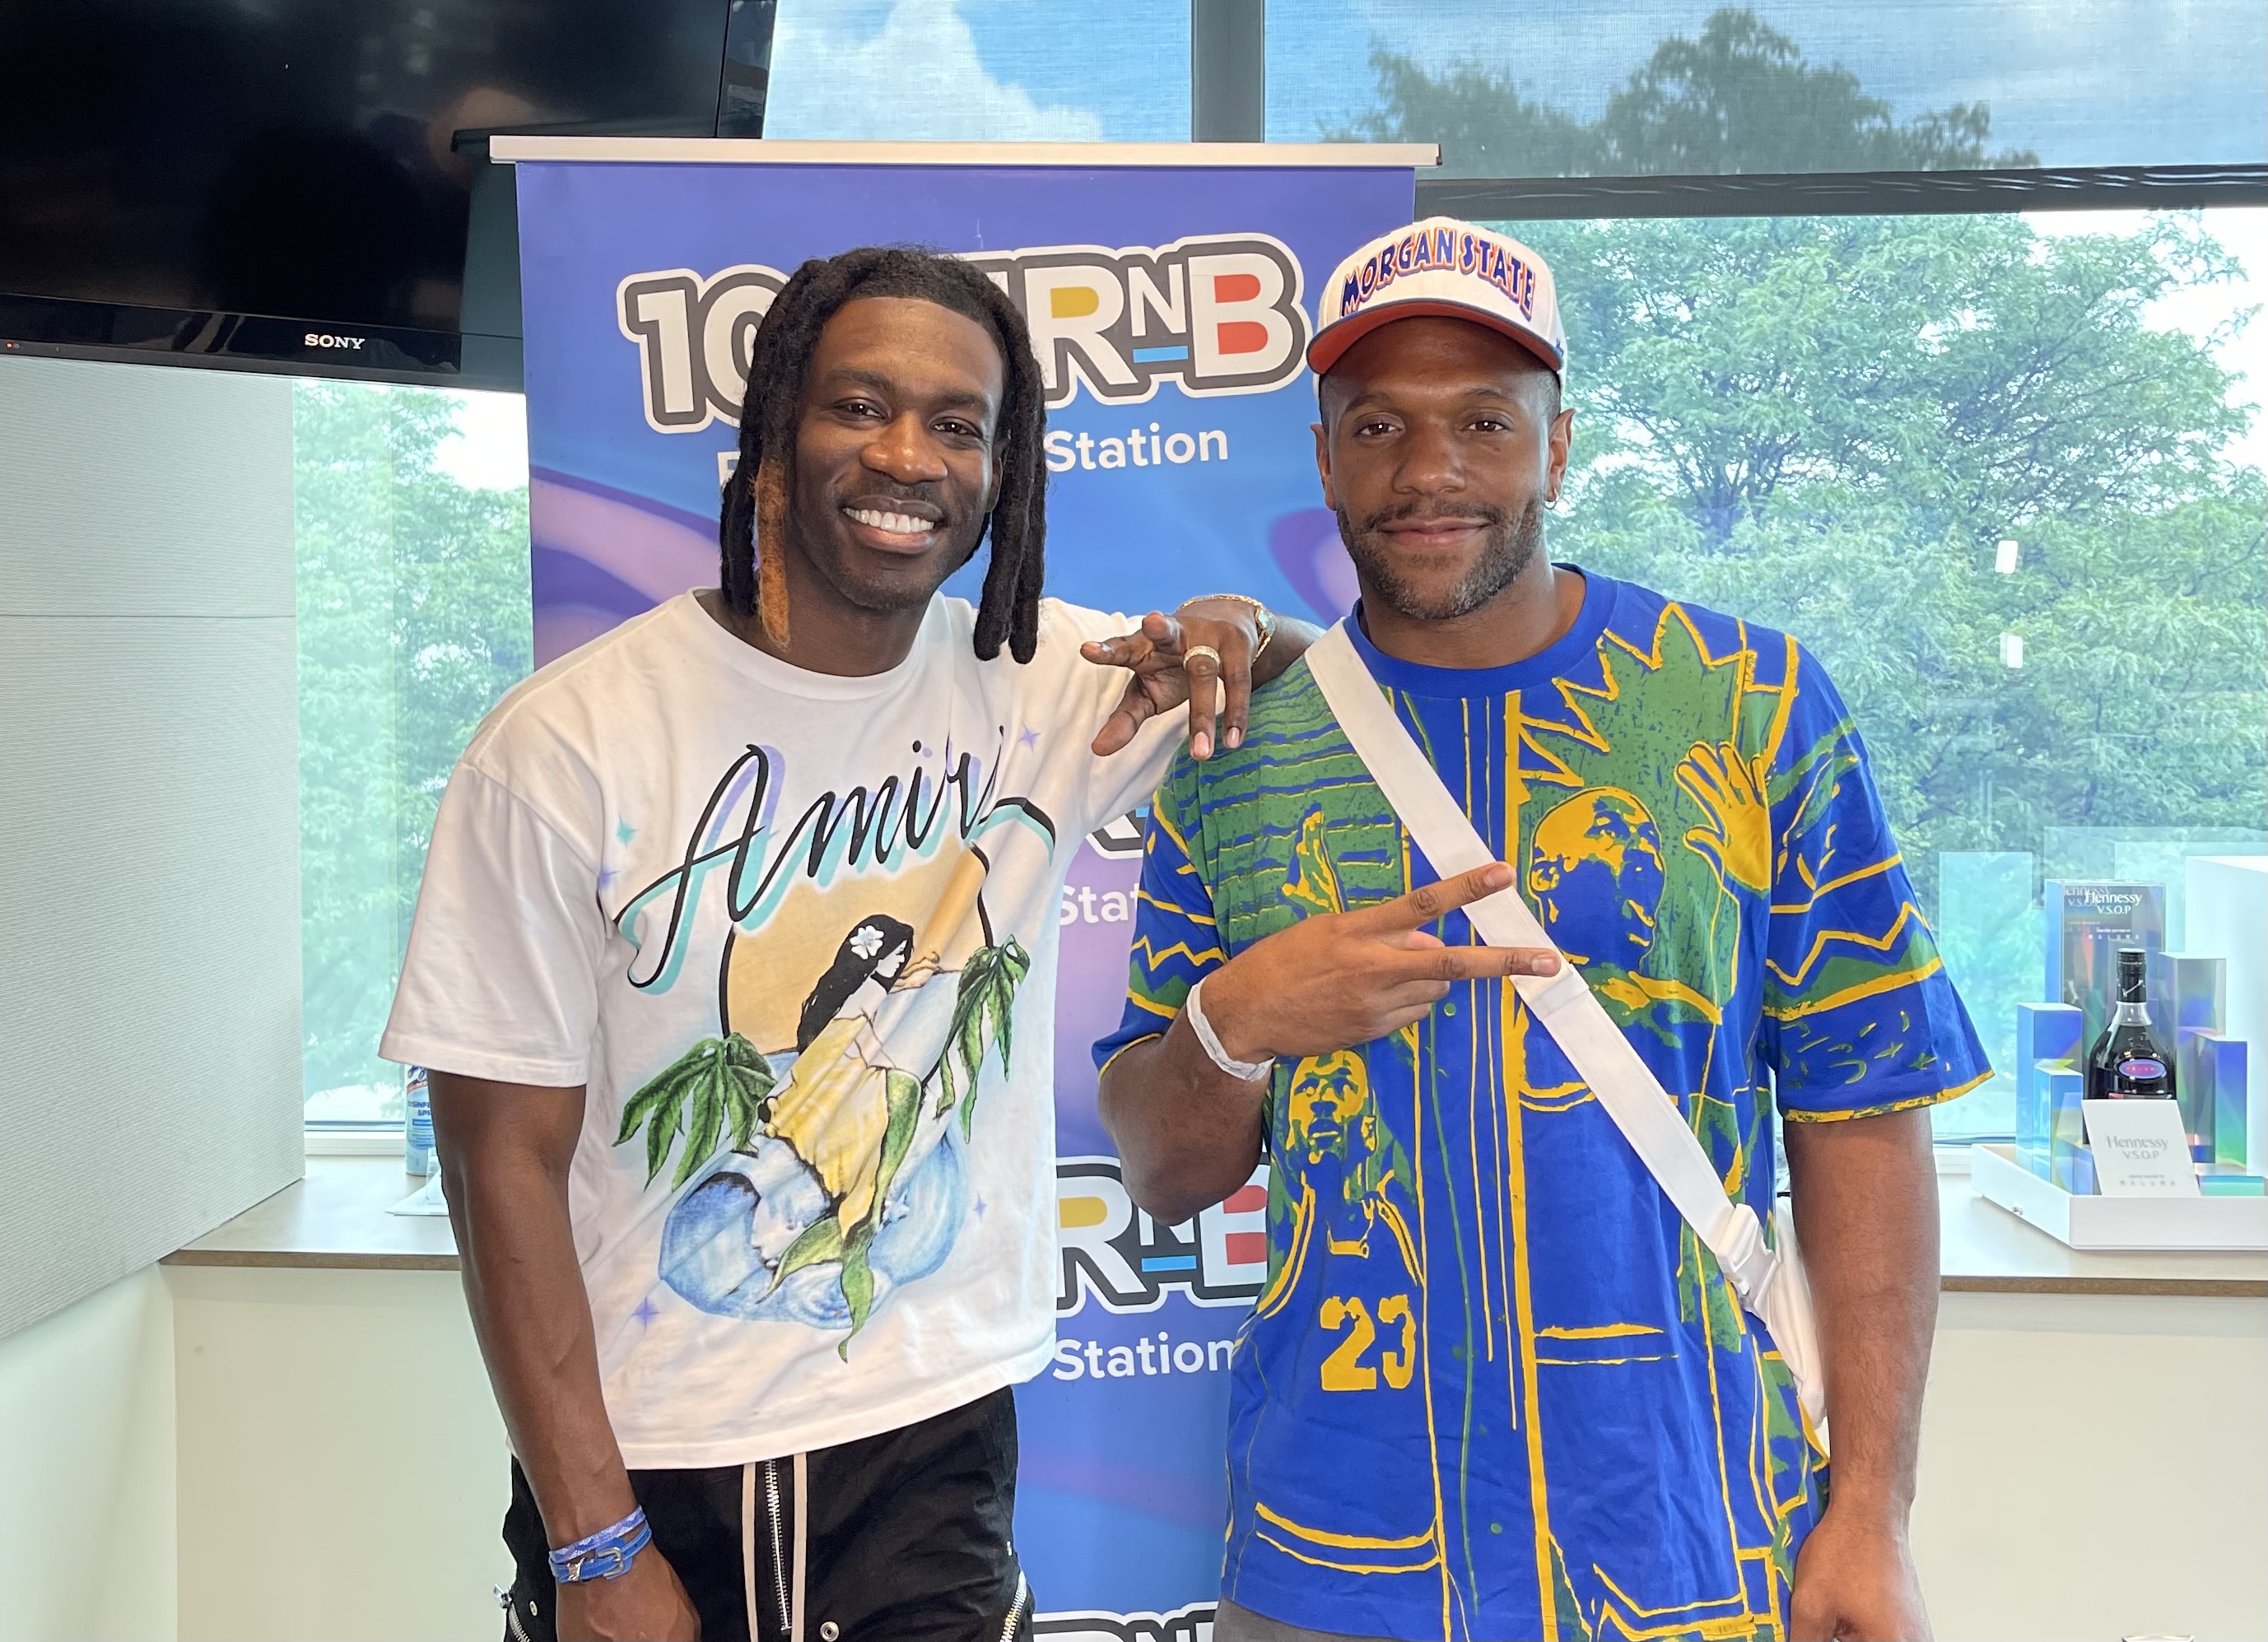 Change Our Future Co-Founder and NFL star Rodney McLeod stopped in the 100.3 studio to catch up with DJ Ayeboogie